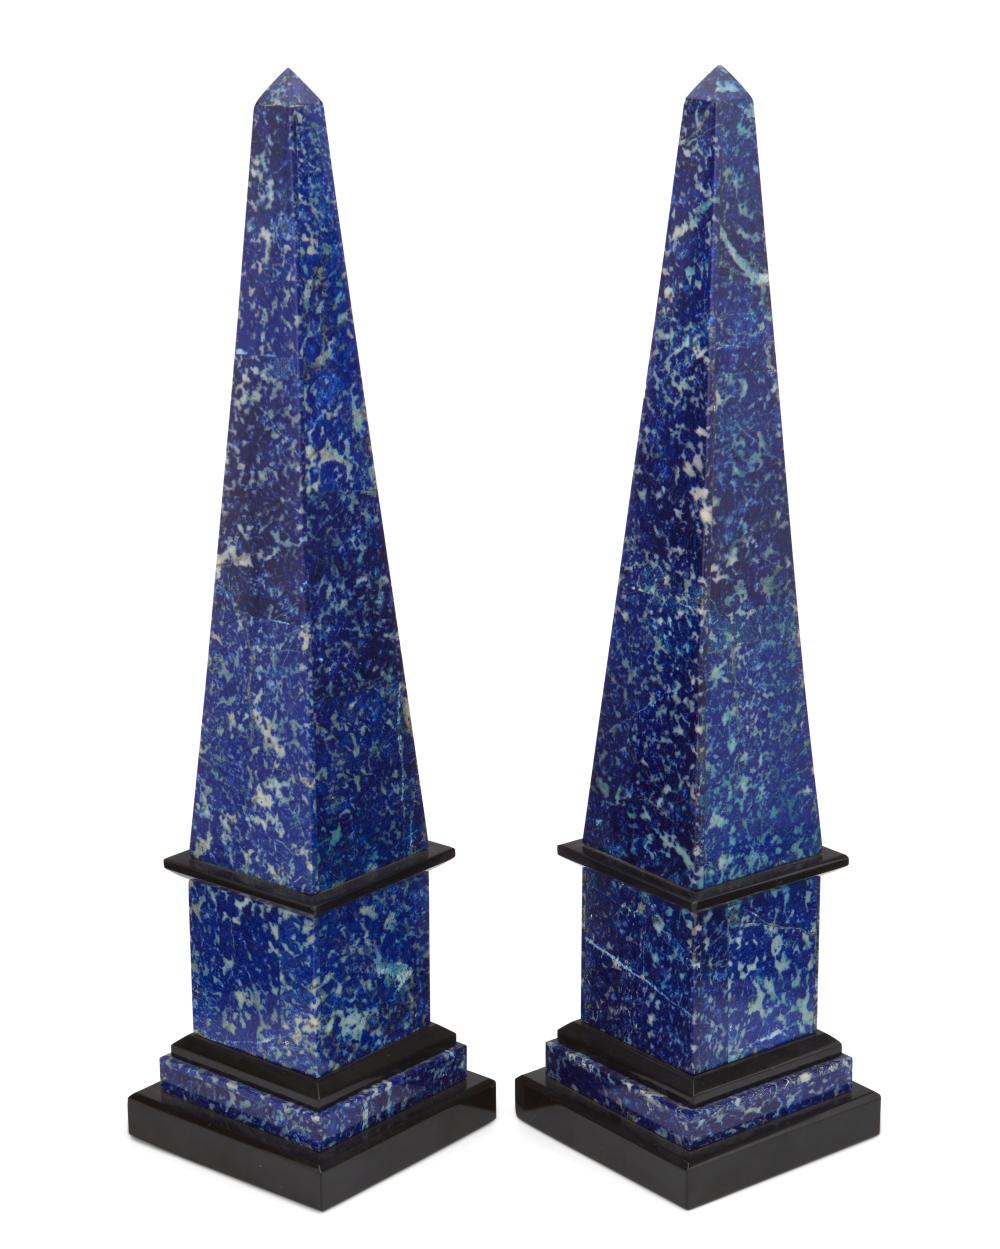 A PAIR OF CARVED LAPIS LAZULI STONE